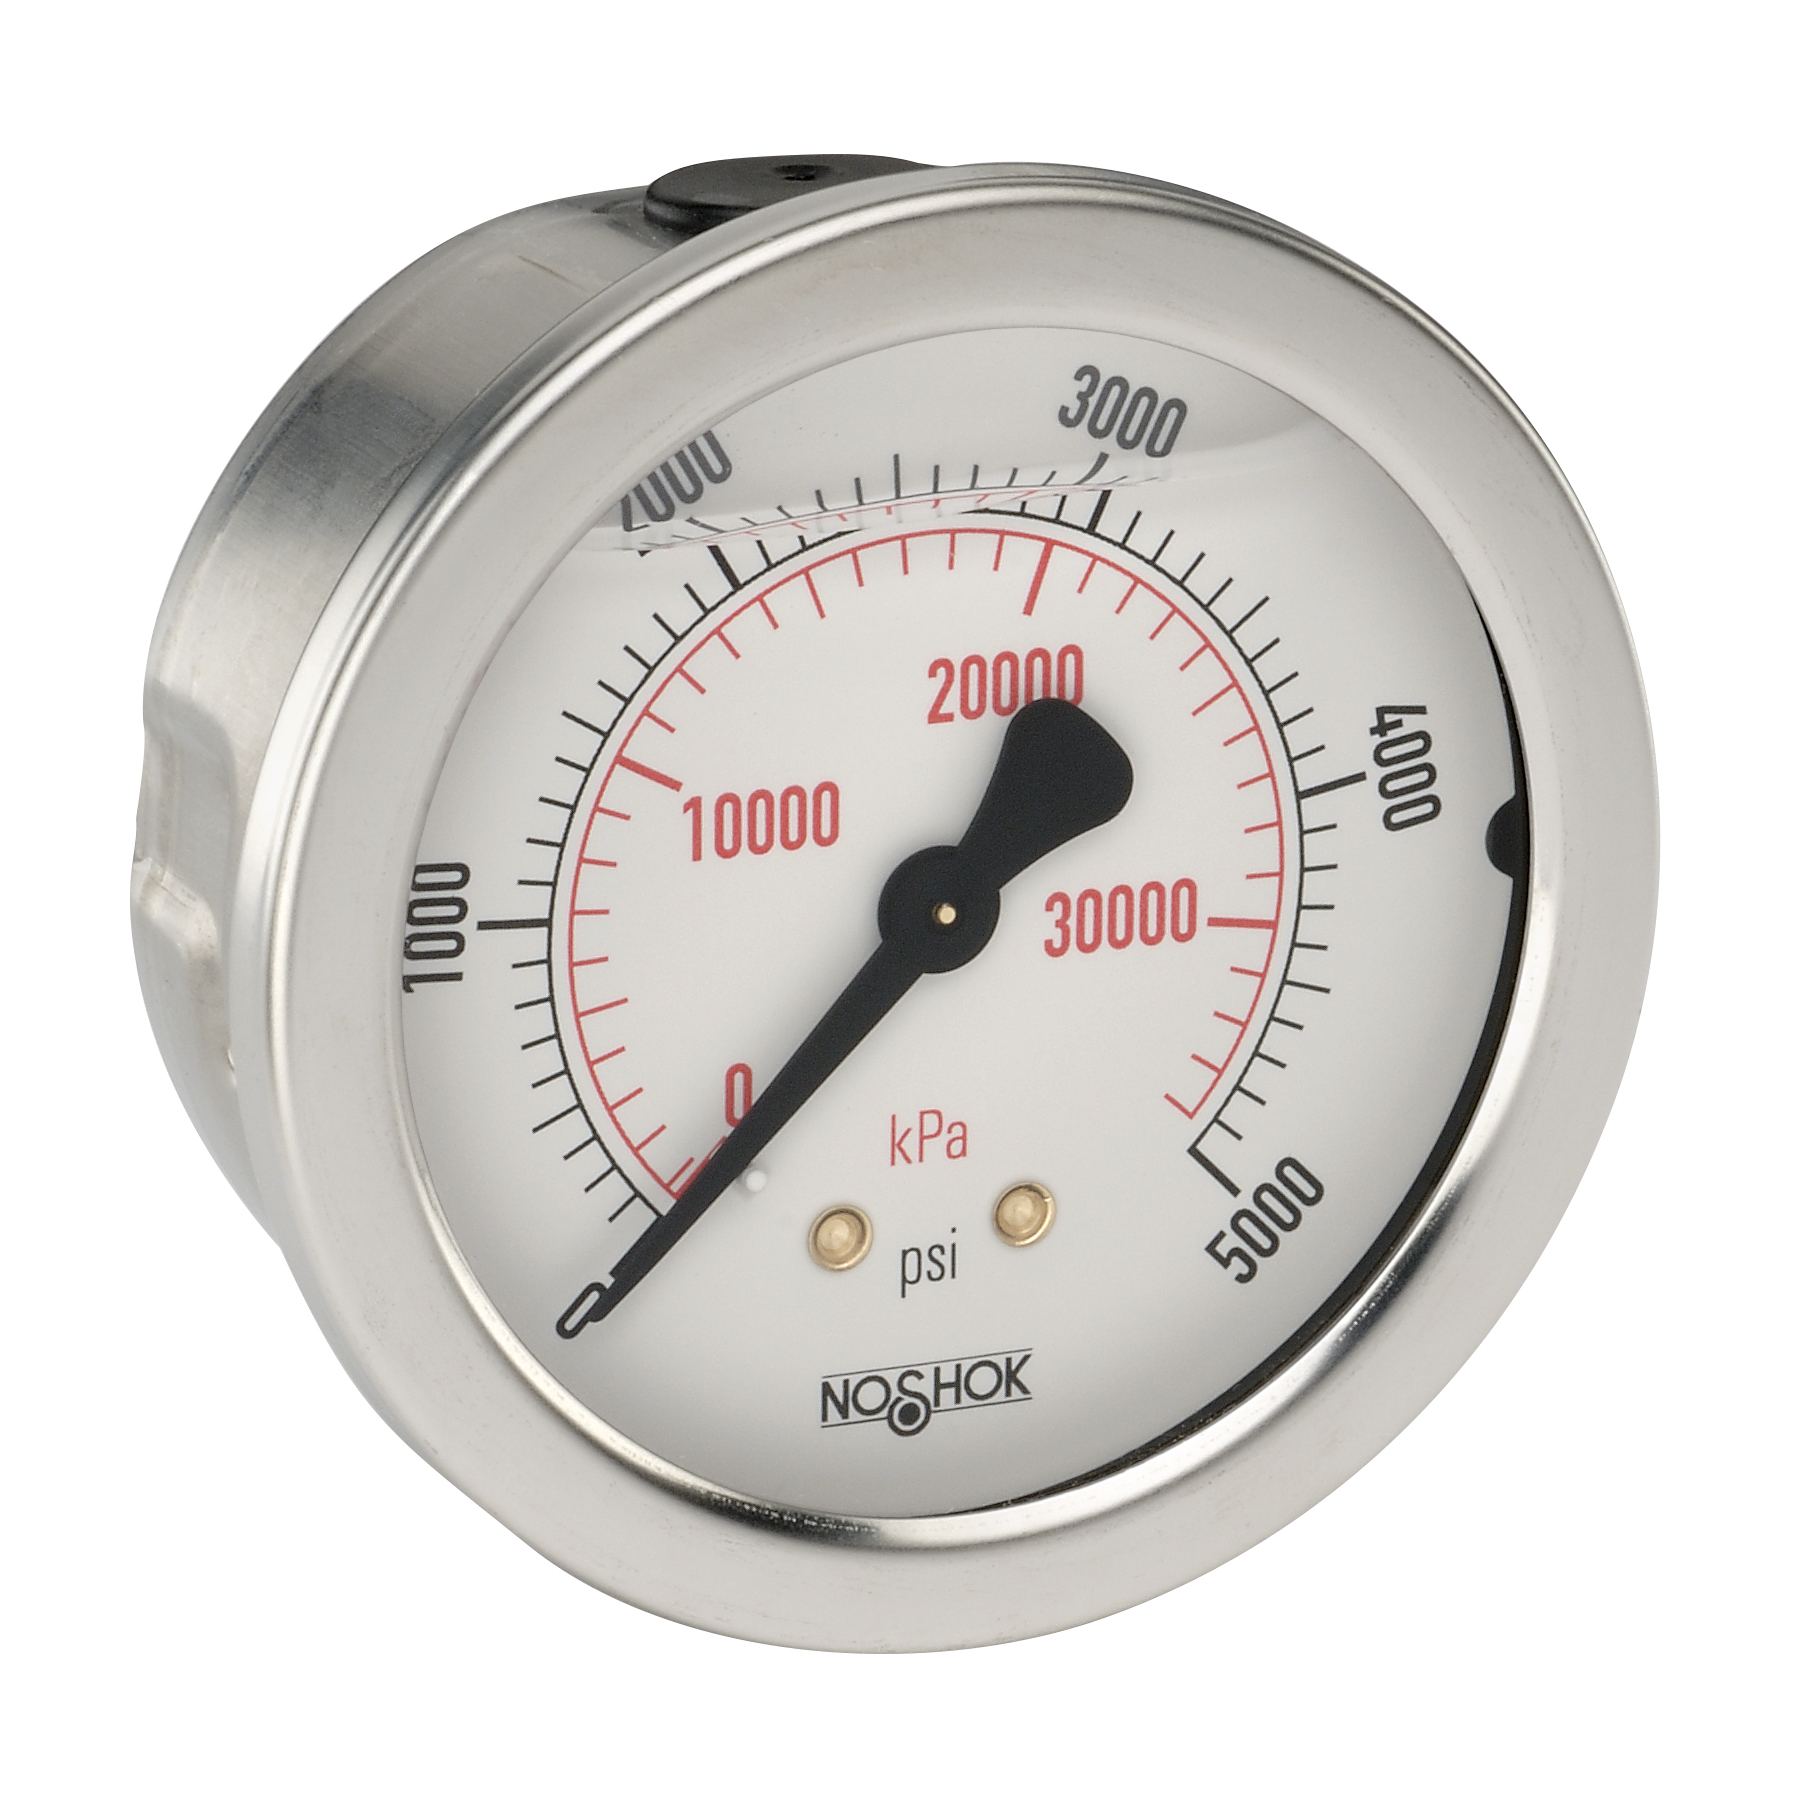 25-911-10000-psi/kPa-GY40 900 Series ABS and Stainless Steel Liquid Filled Pressure Gauges